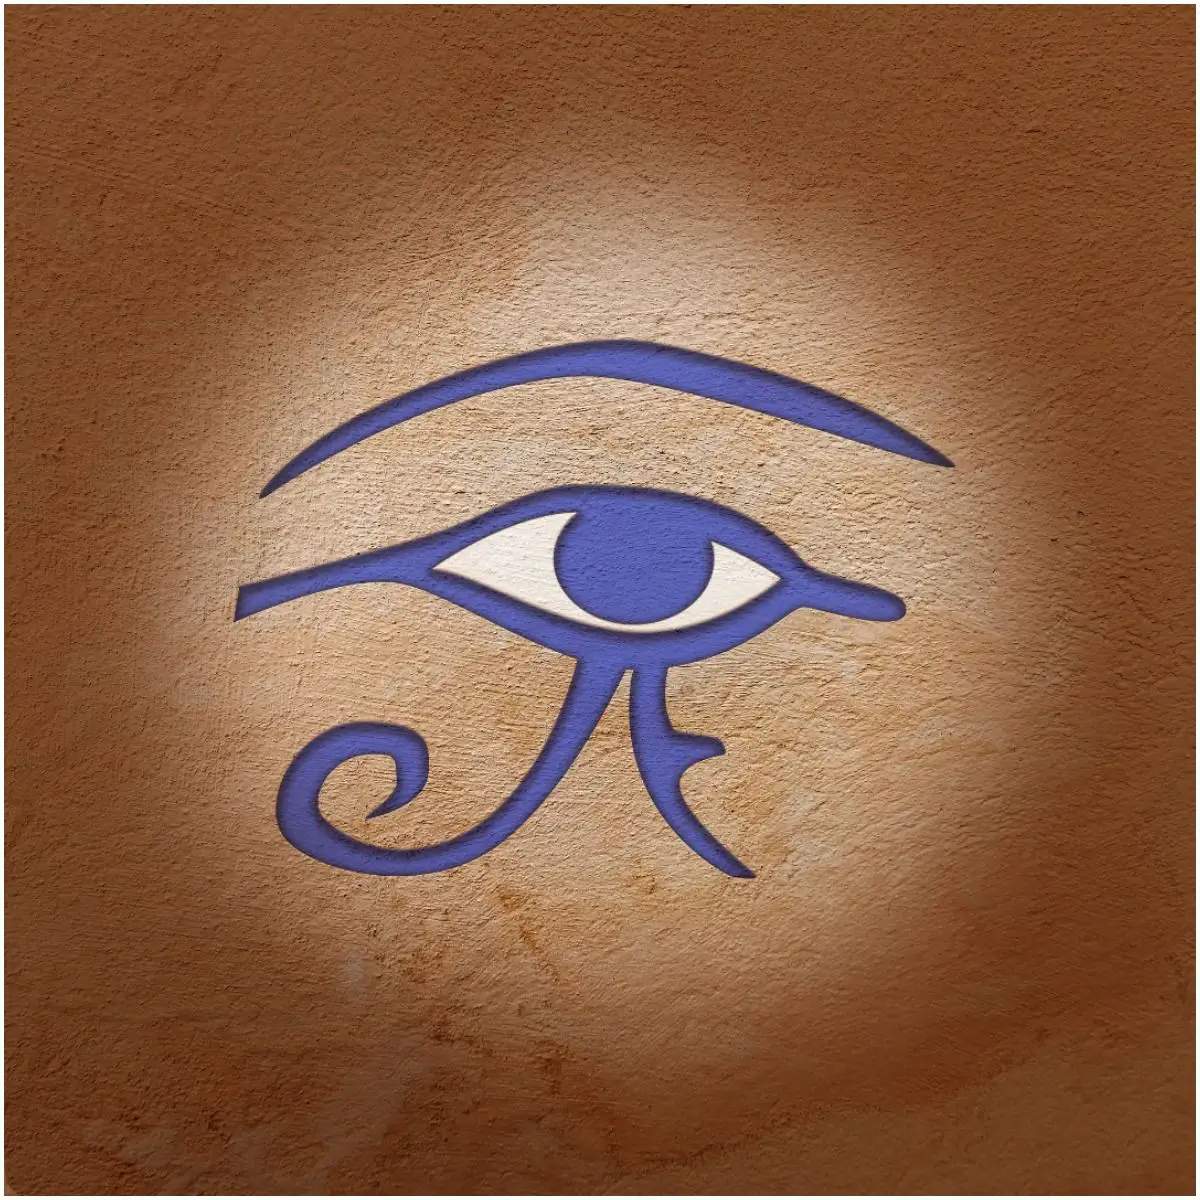 What Is The Eye Of Horus?